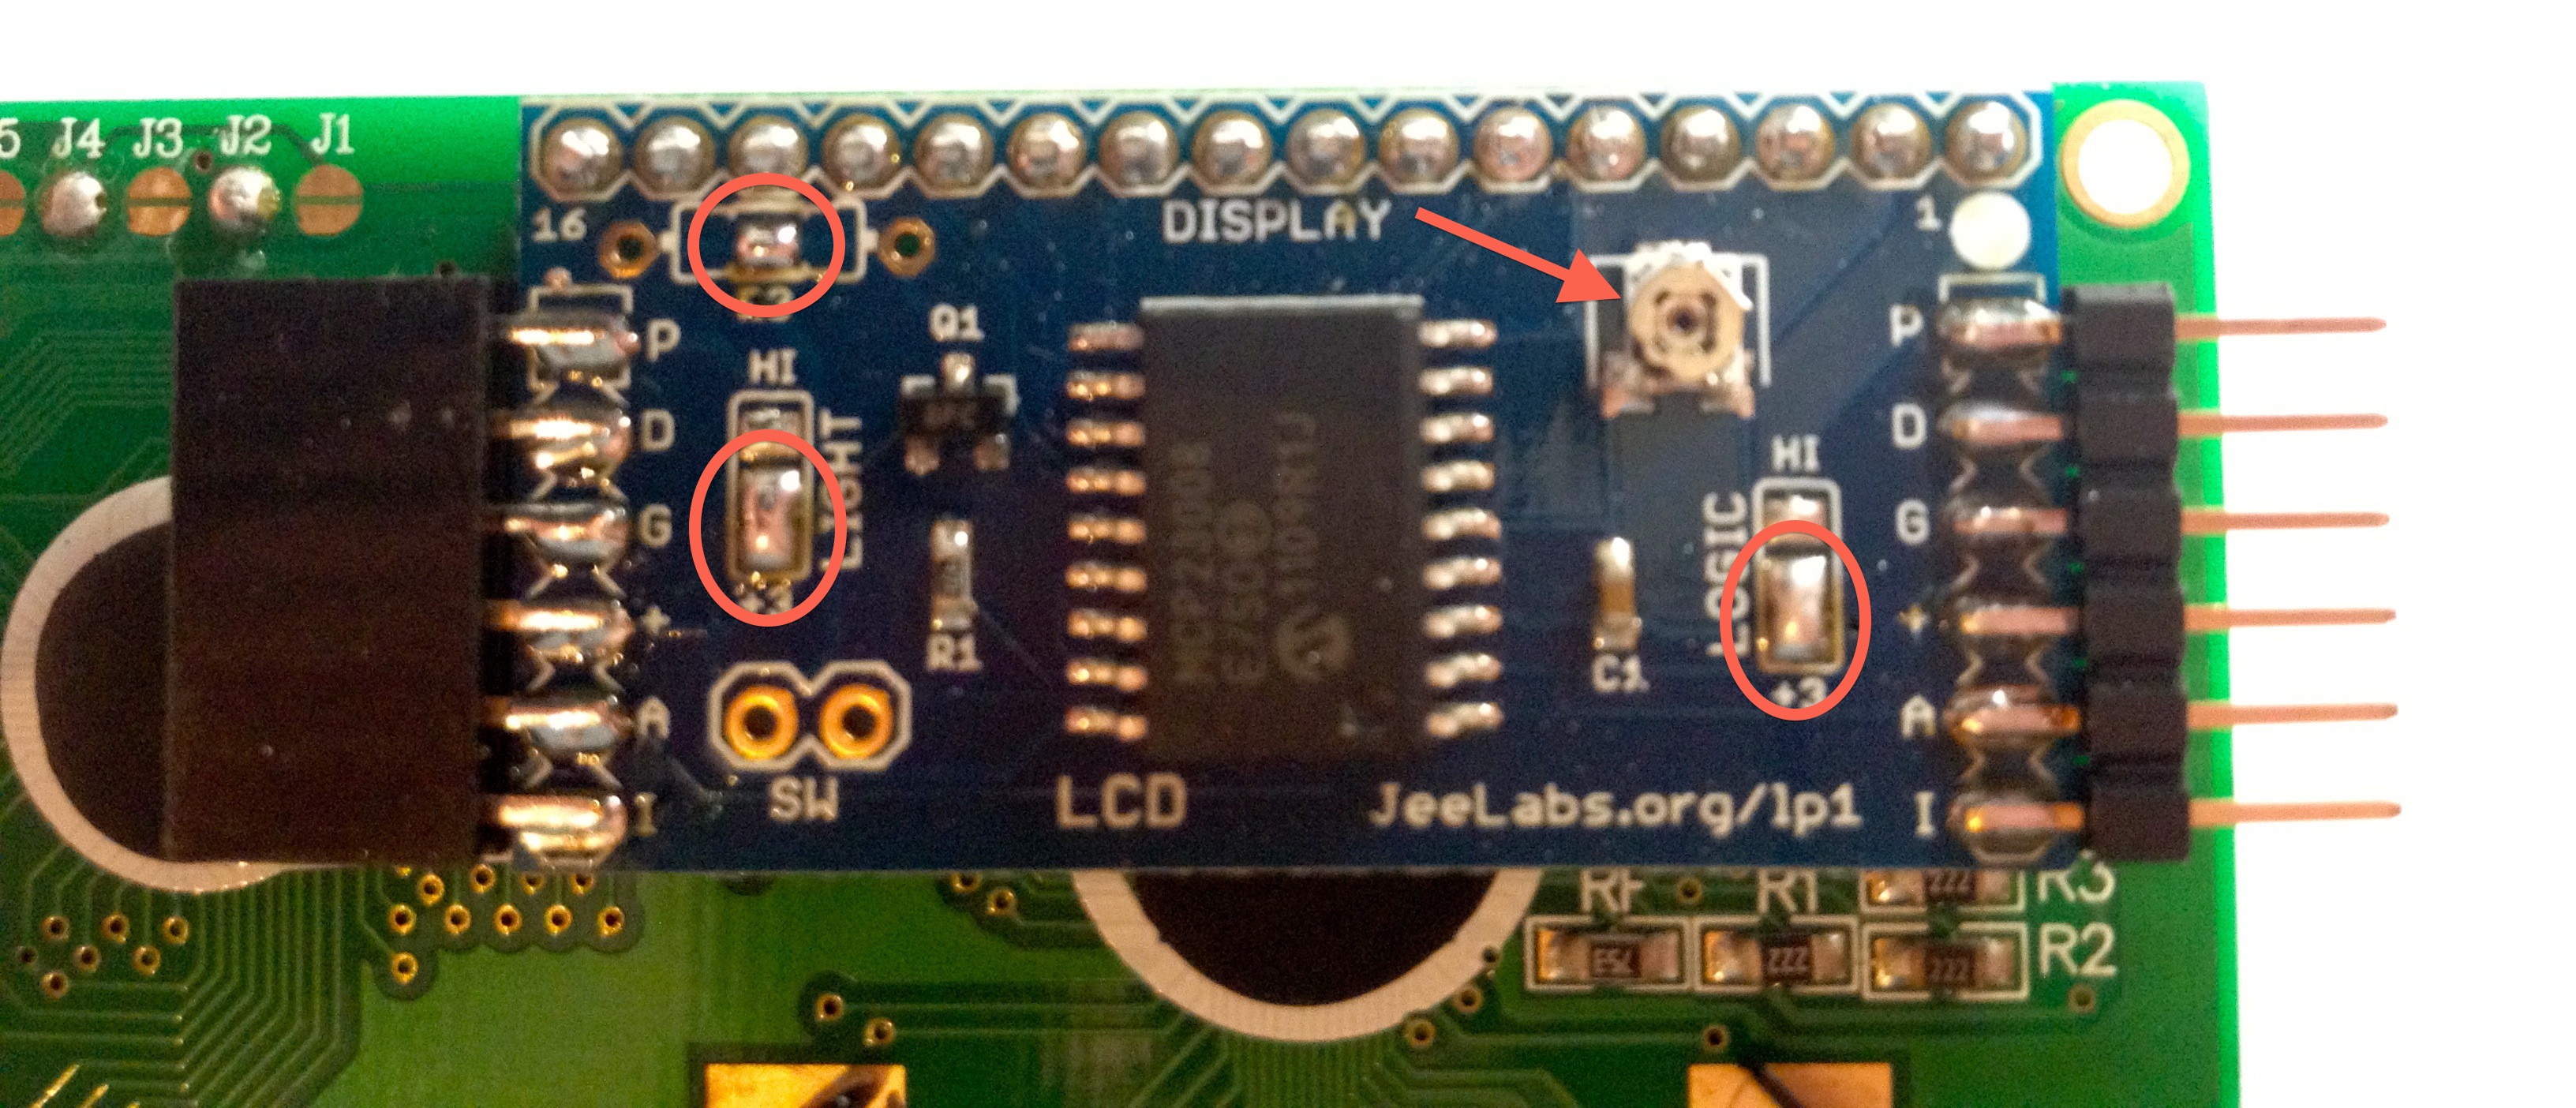 JeeLabs LCD Plug 2 annotated